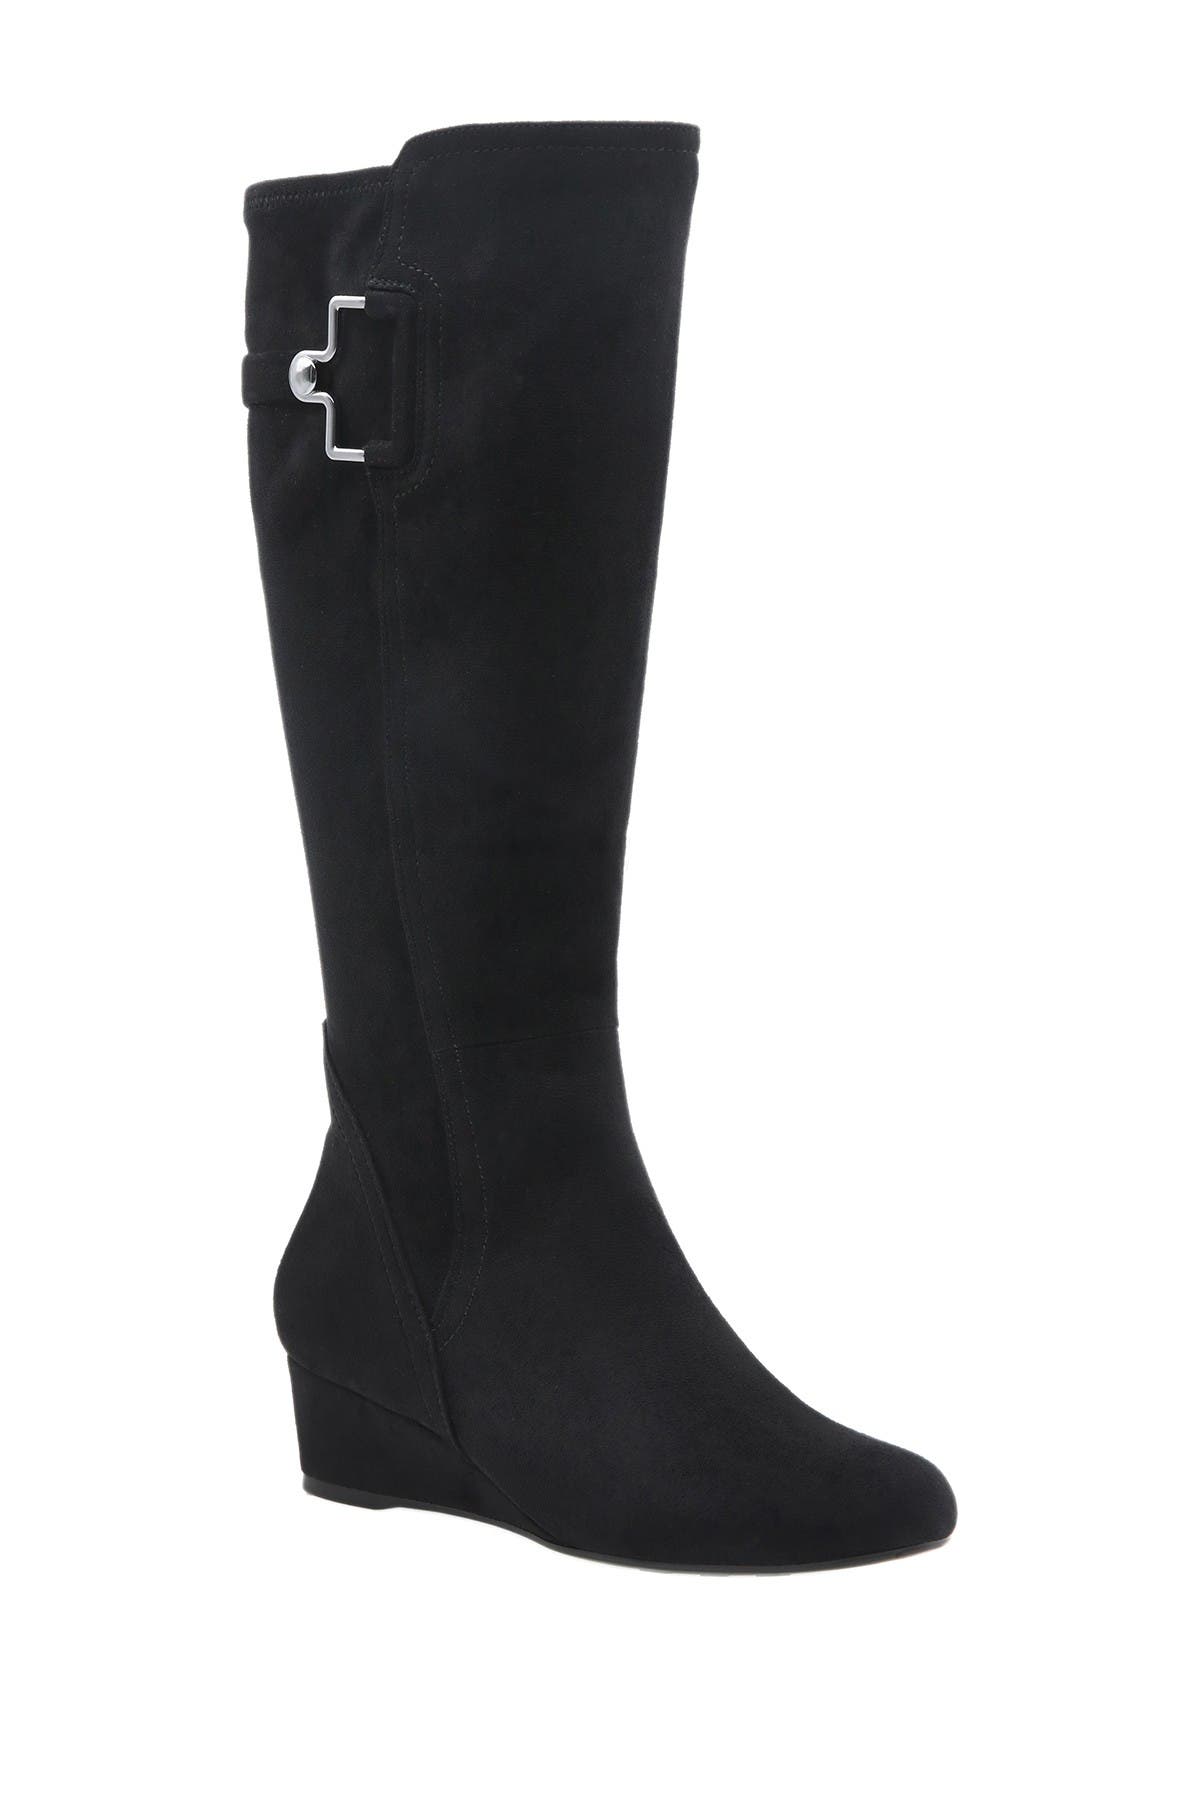 Impo | Glada Stretch Wedge Tall Boot 